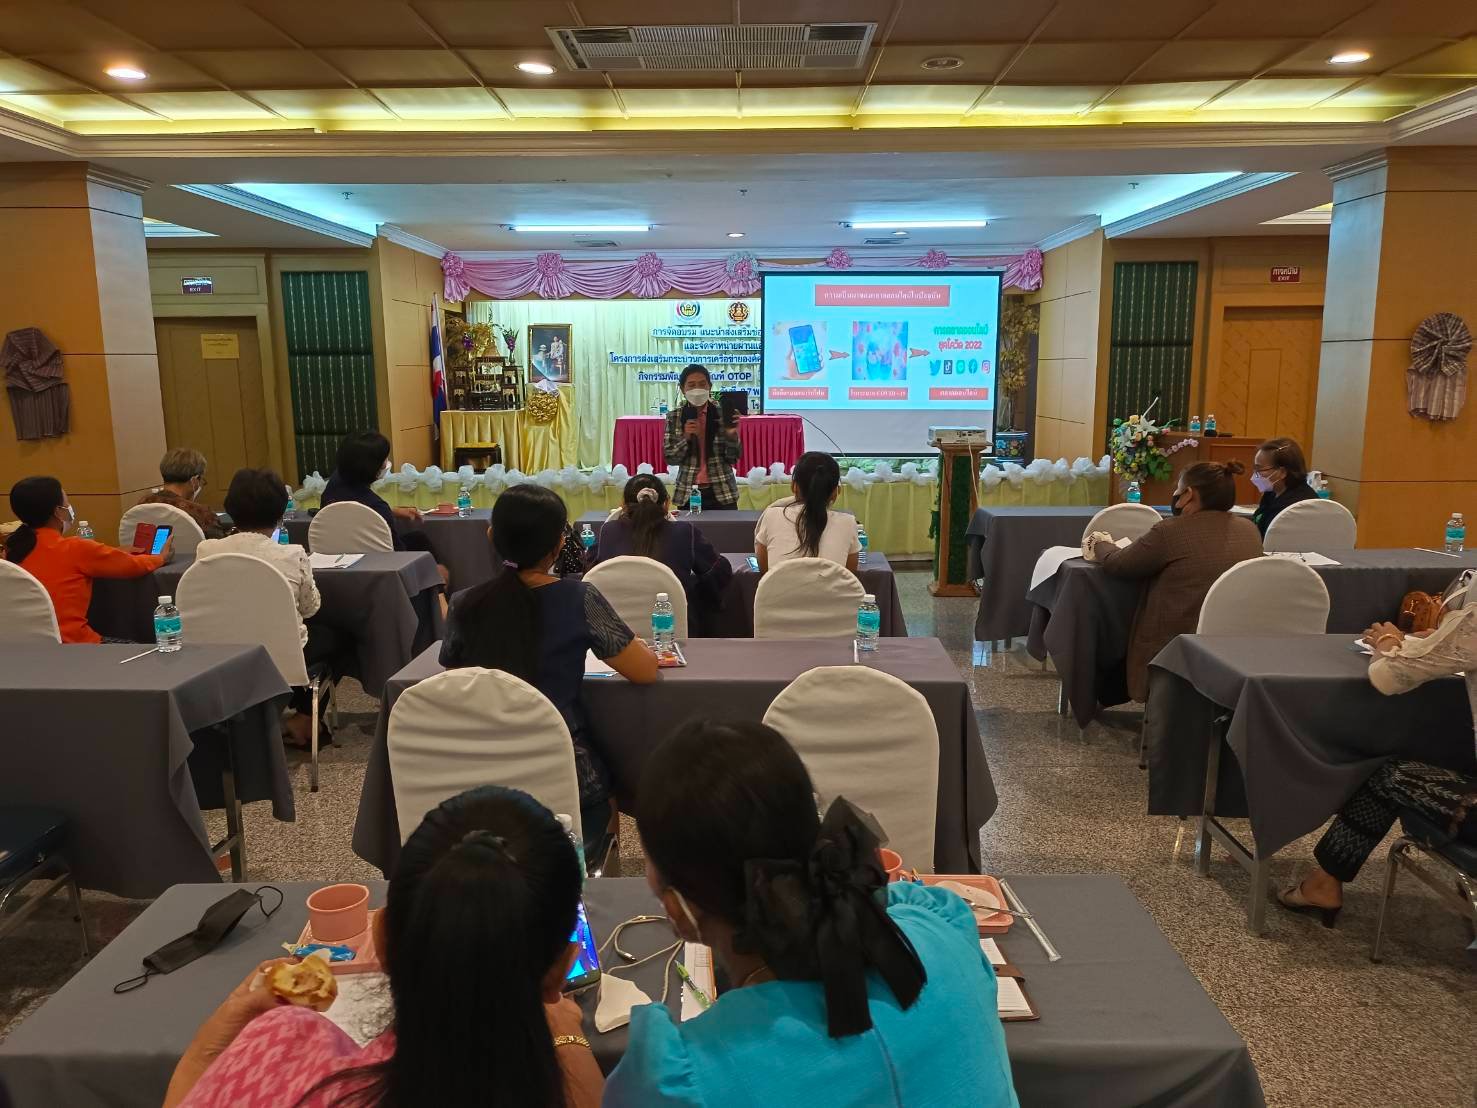 Mrs. Amornrat Muenjitnoy, a lecturer of Logistics Management at Suan Sunandha Rajabhat University, Udon Thani Center, was invited from Qexpress (Thailand) Co.,Ltd. to lecture on Community Product Development : Value-added Communty Products to Support Know